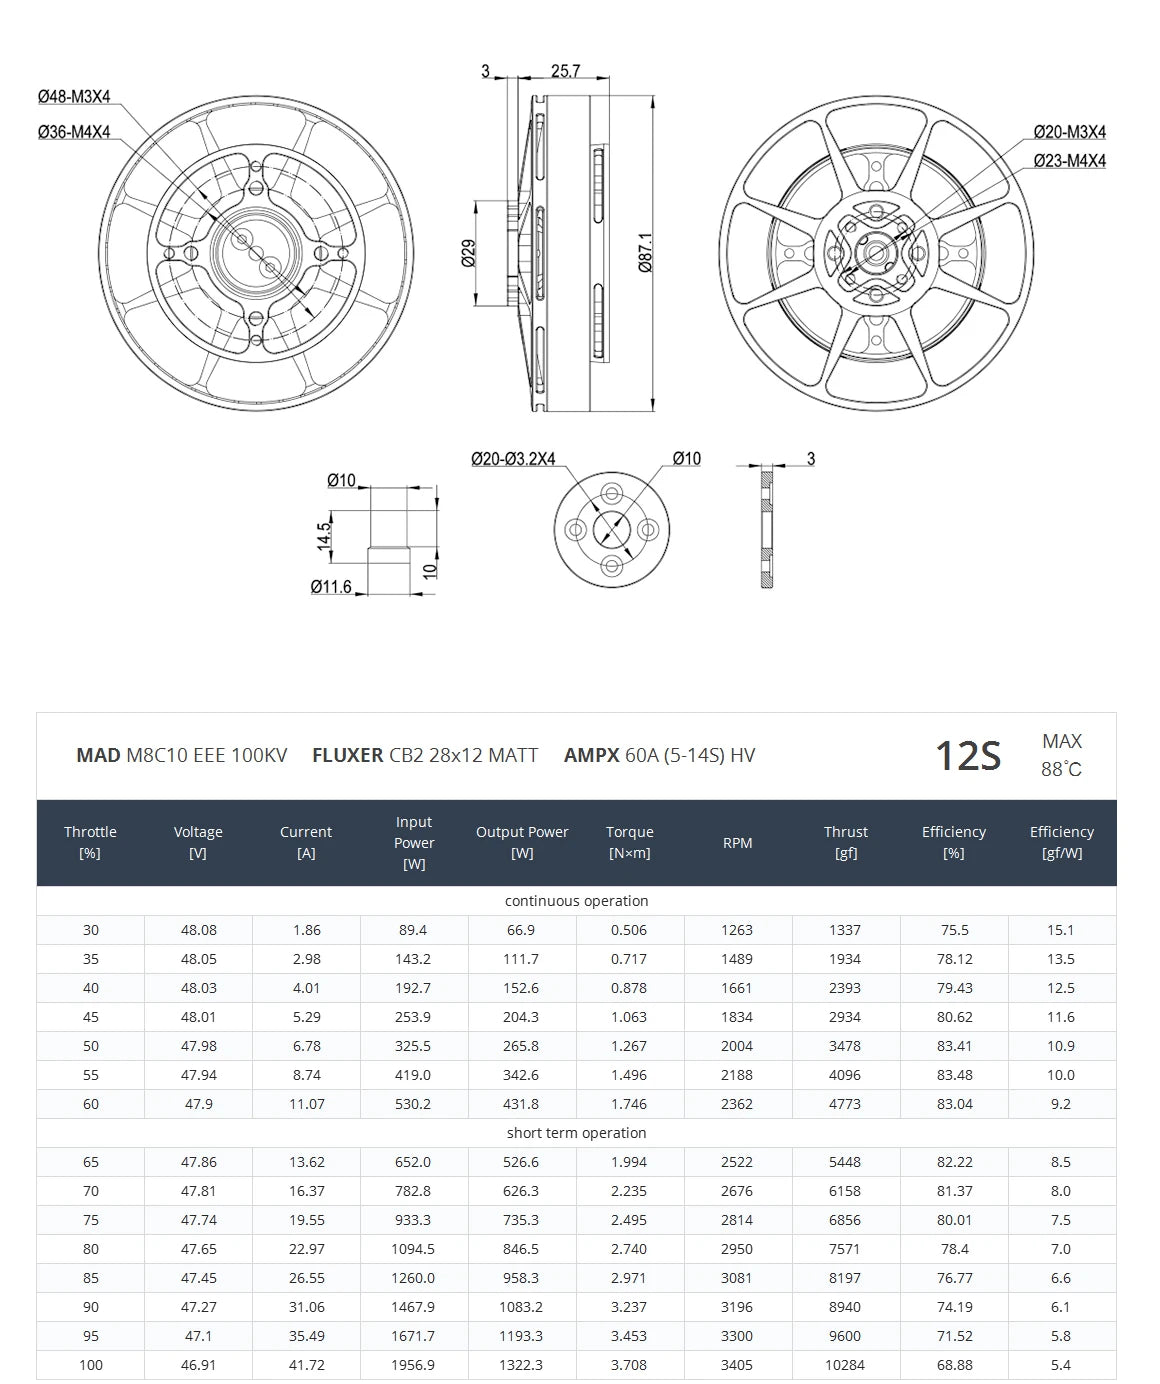 MAD M8C10 EEE Drone Motor Specification: details on motor size, balance, and performance.